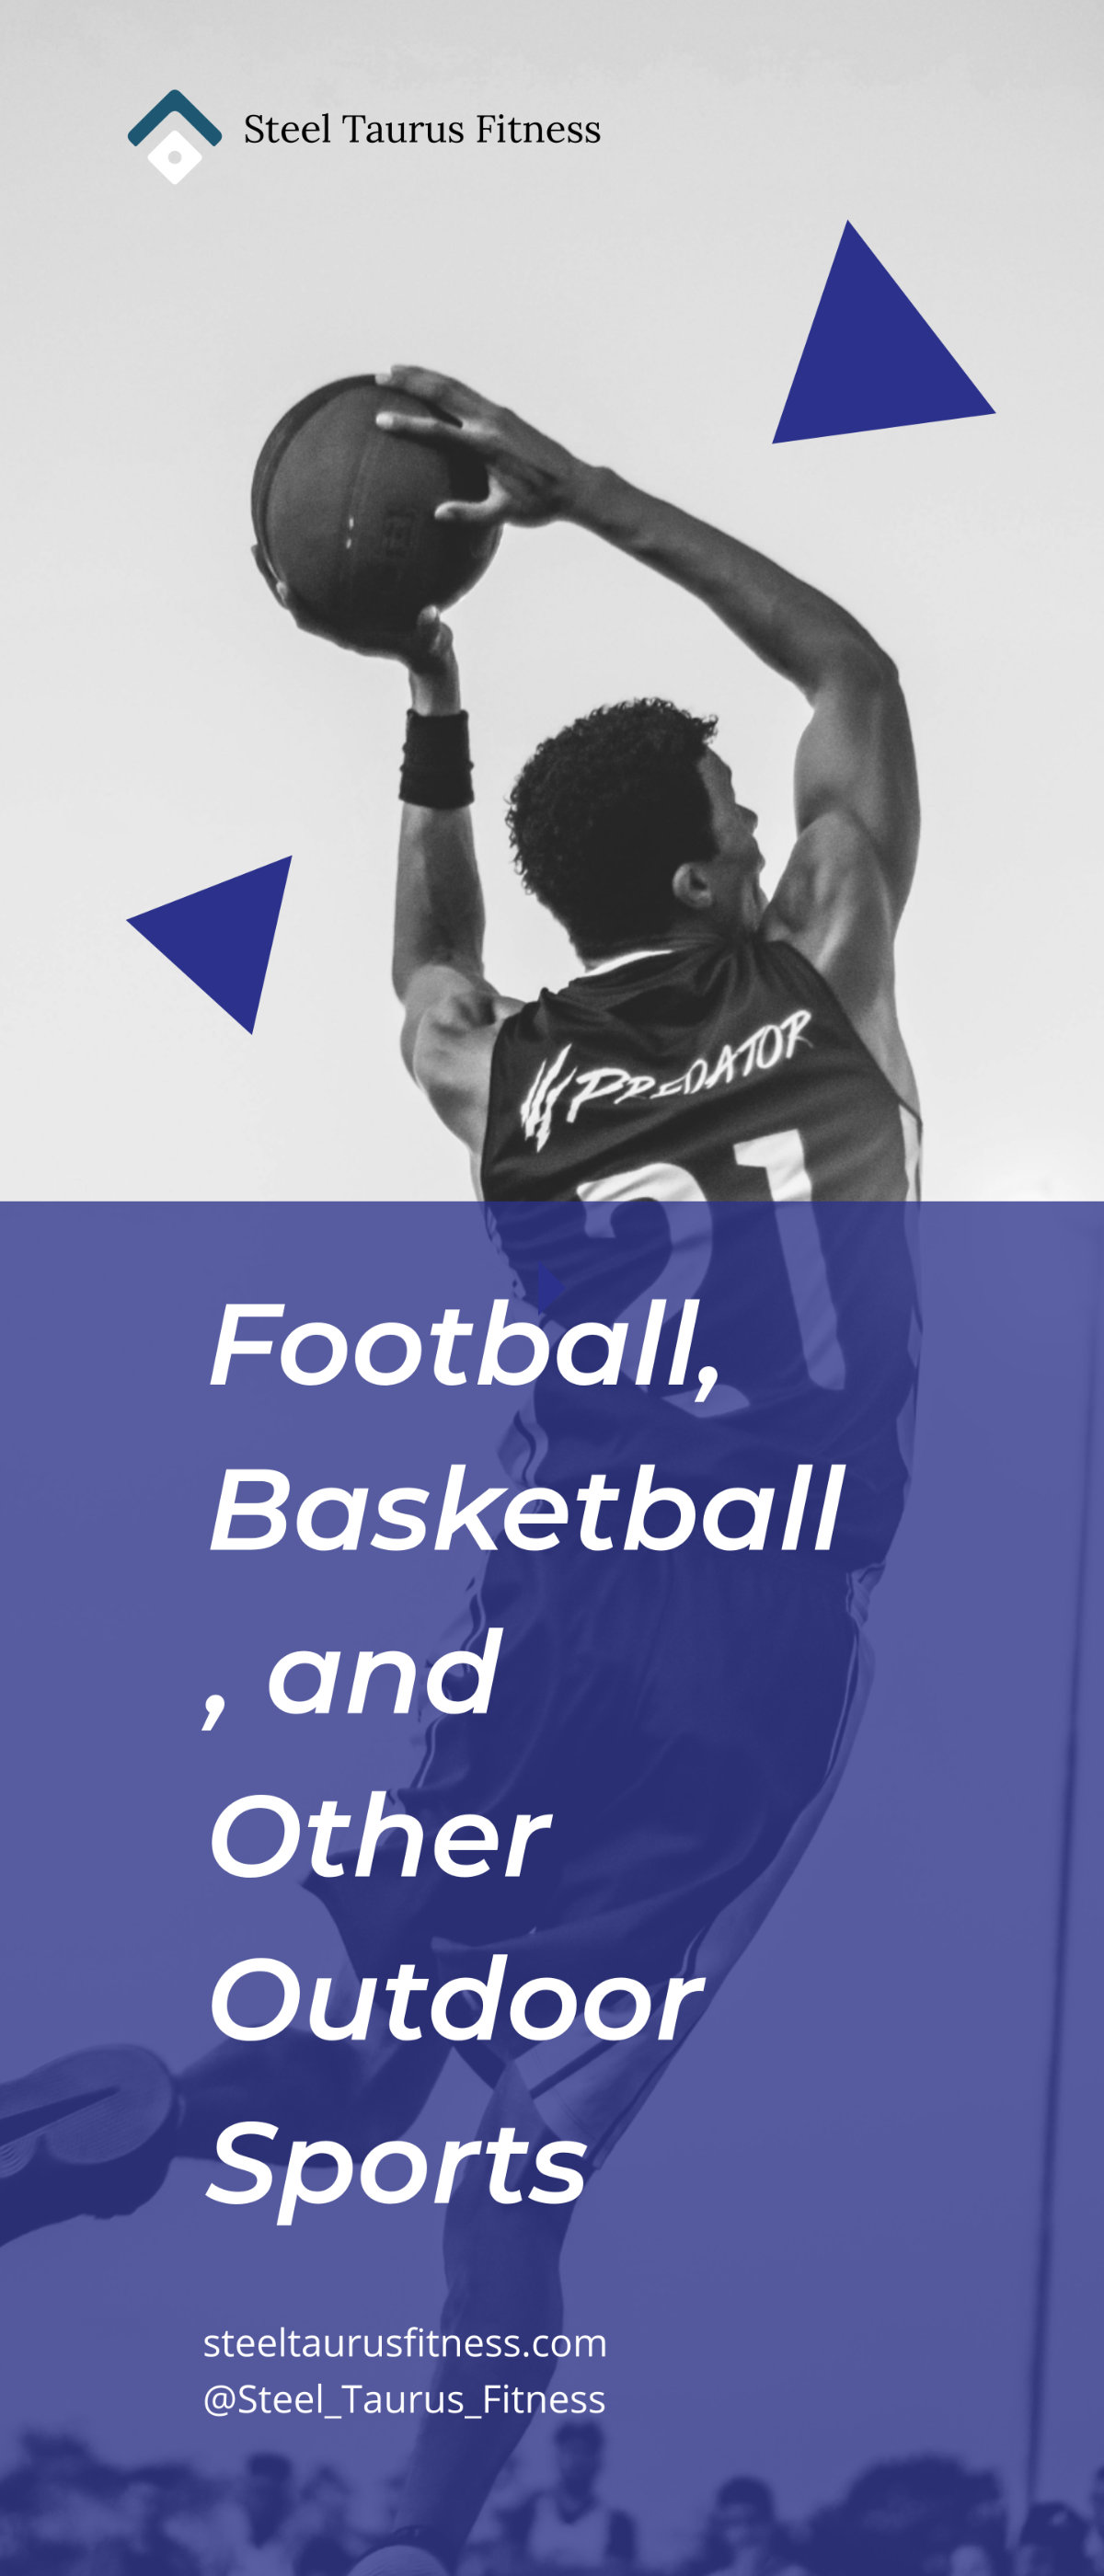 Sports Outdoor Roll Up Banner Template